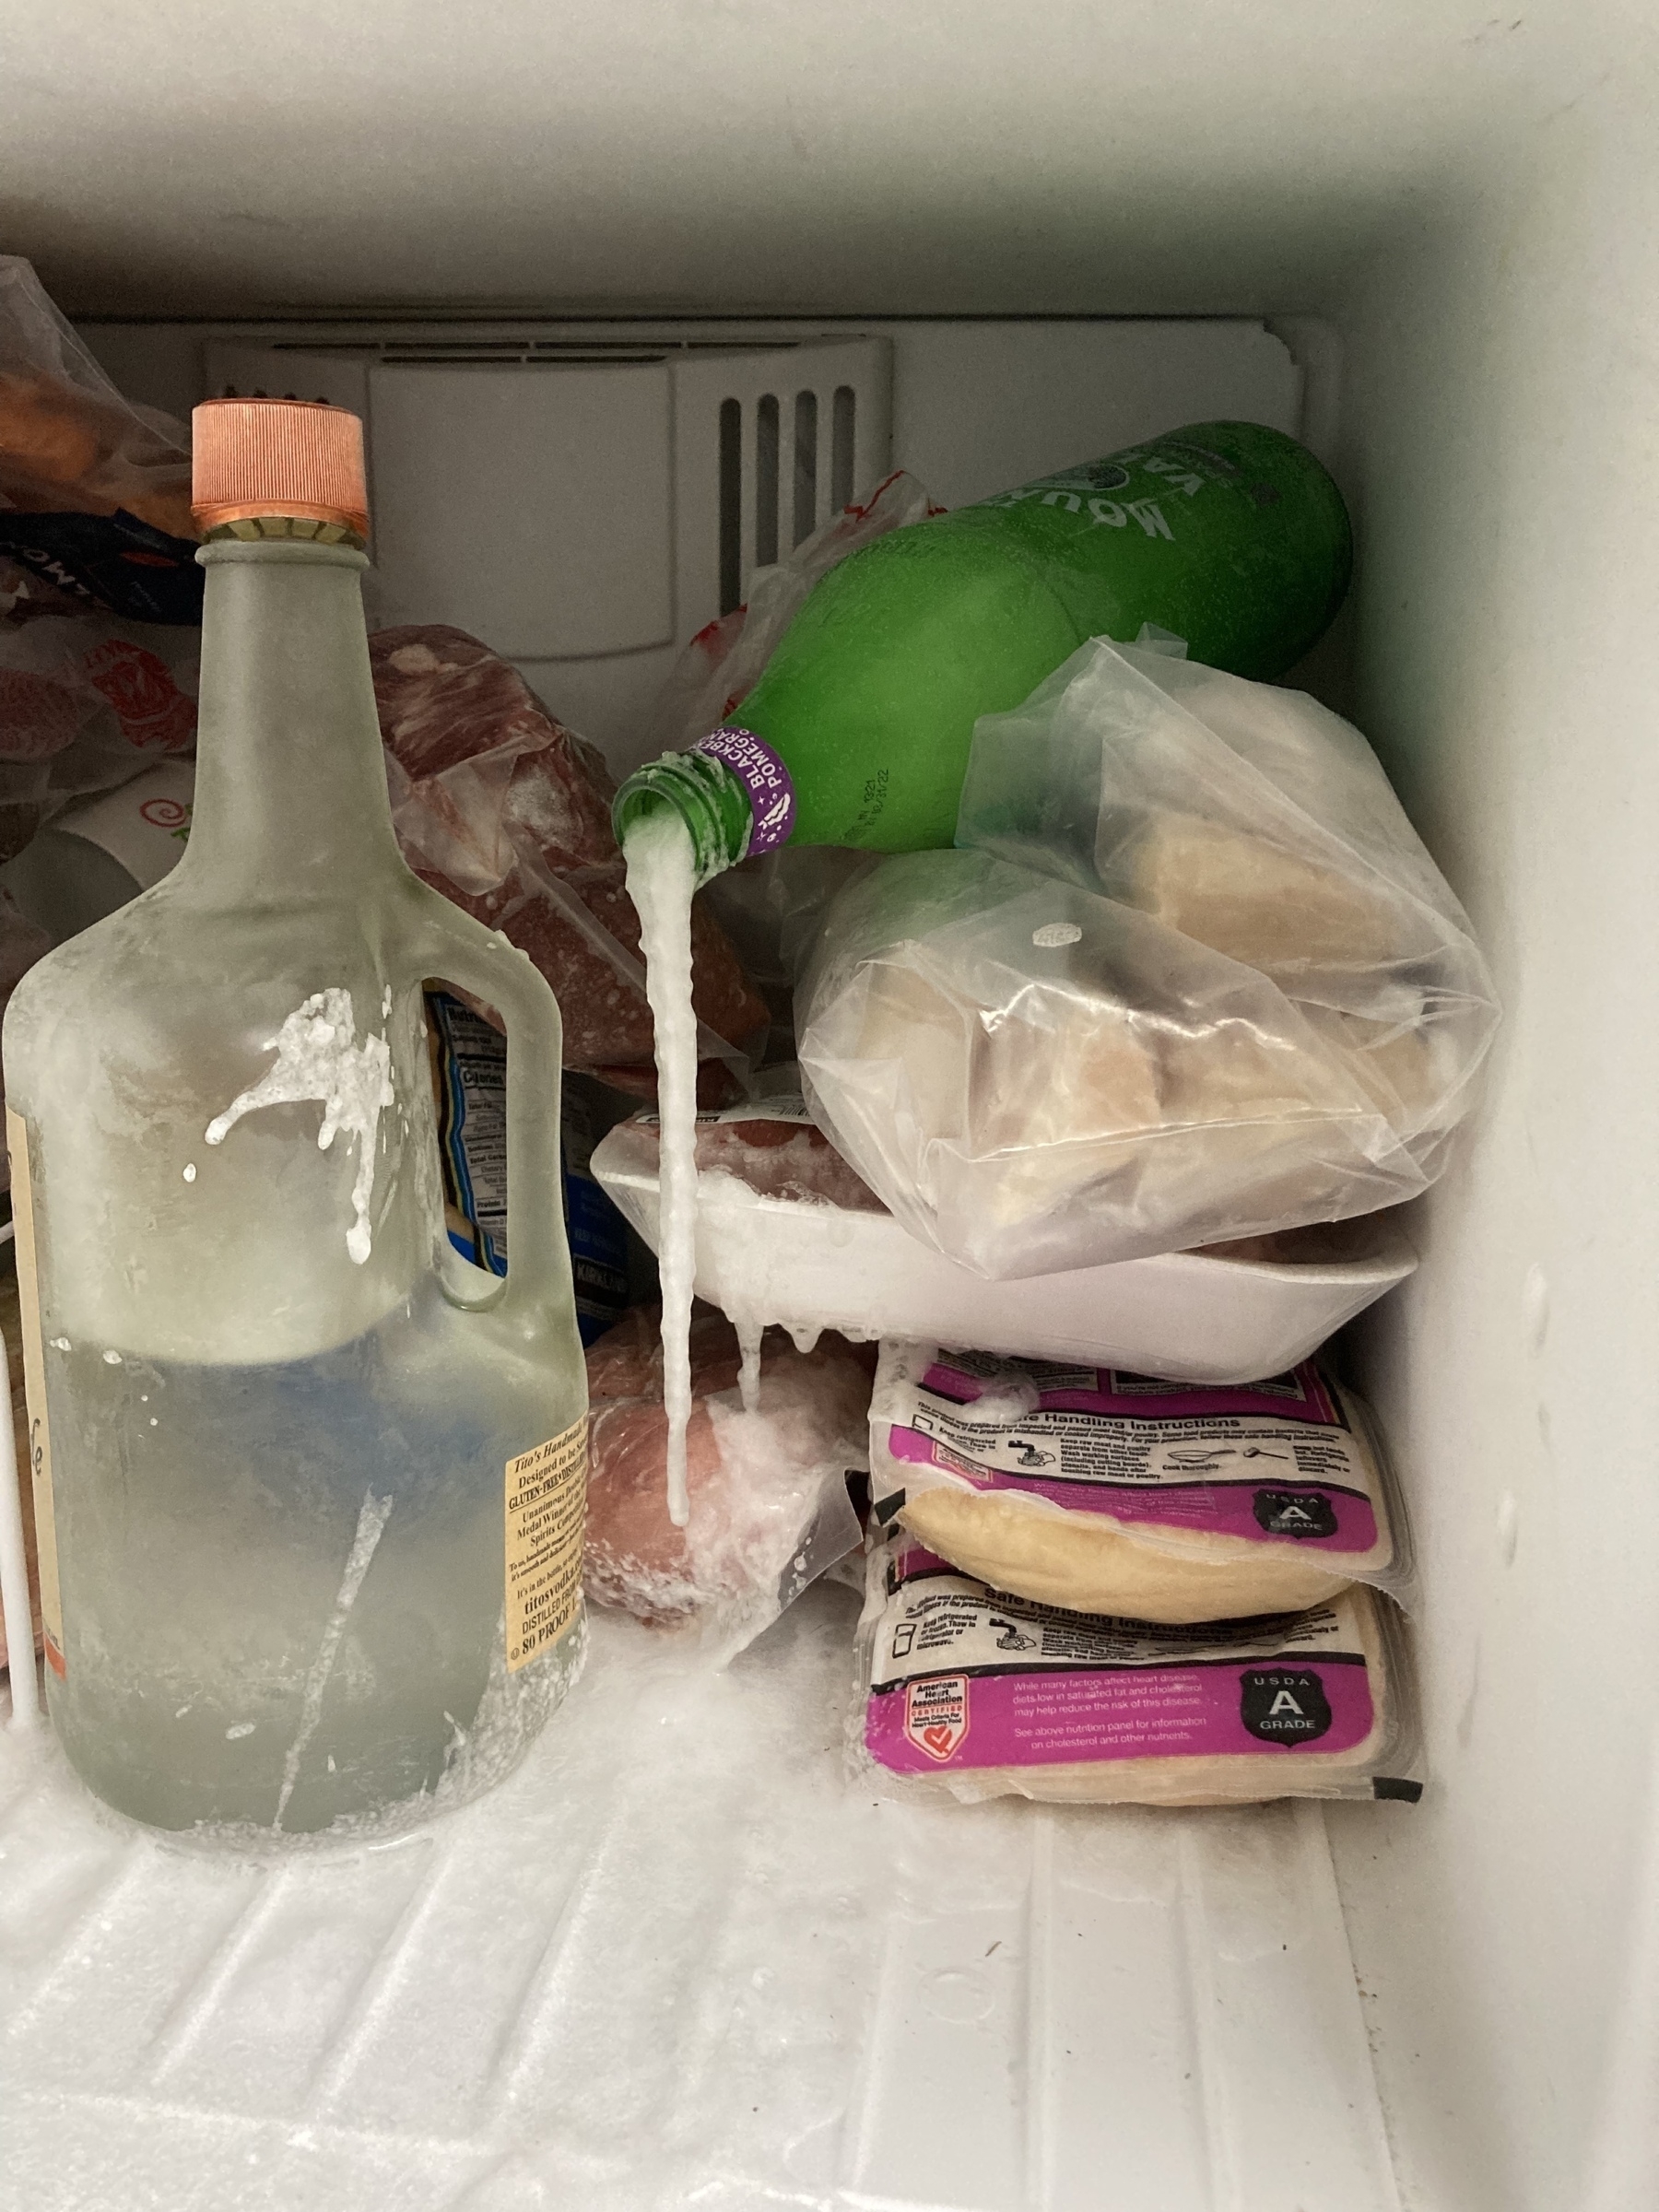 Exploded water bottle in freezer. 